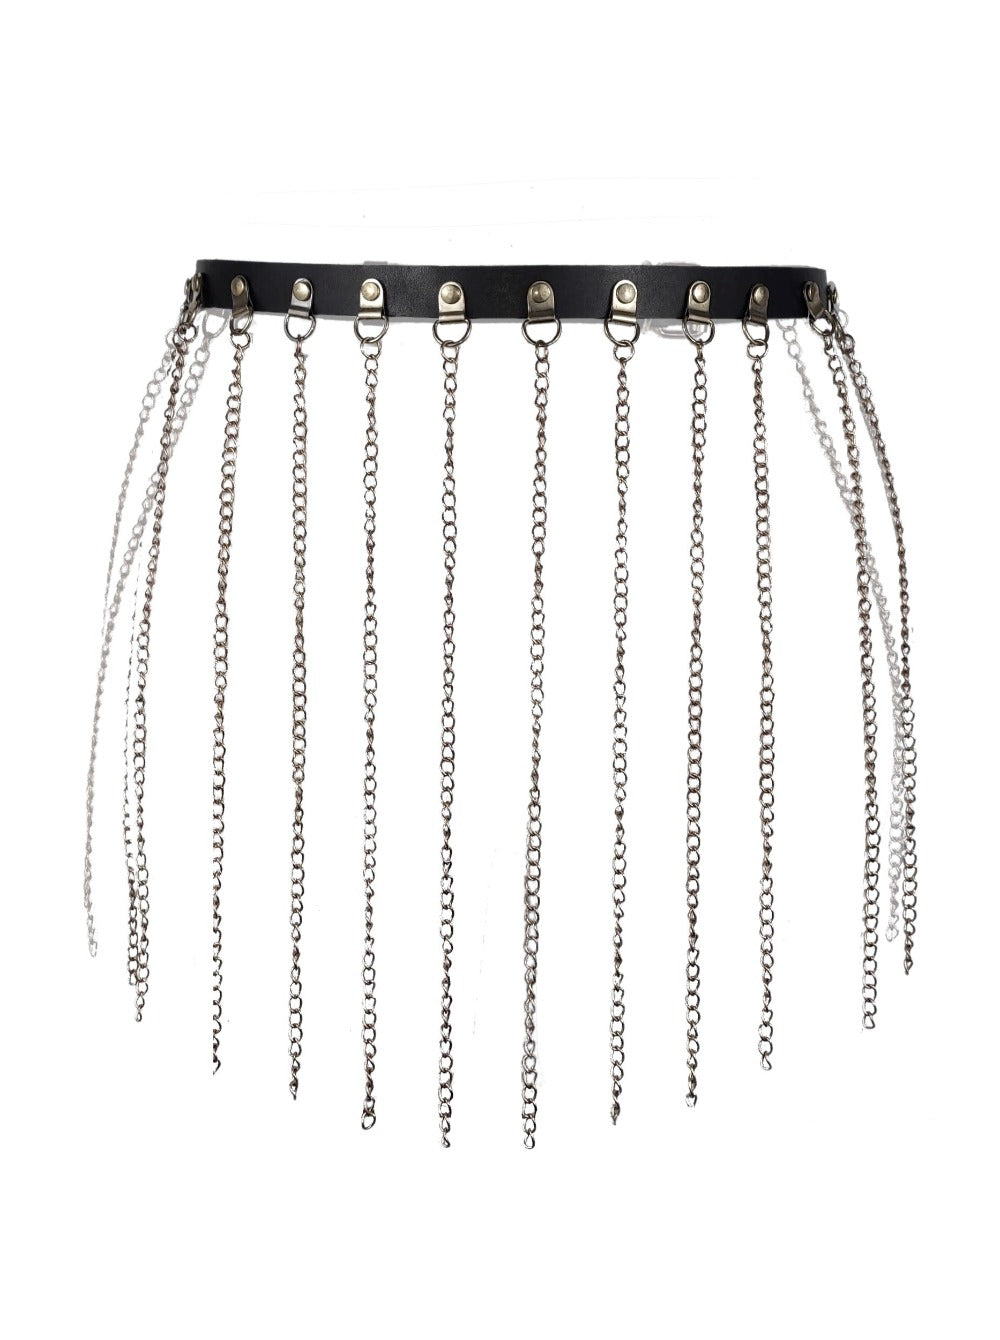 Leather Waist Belt Harness with Sexy Chains No. 01